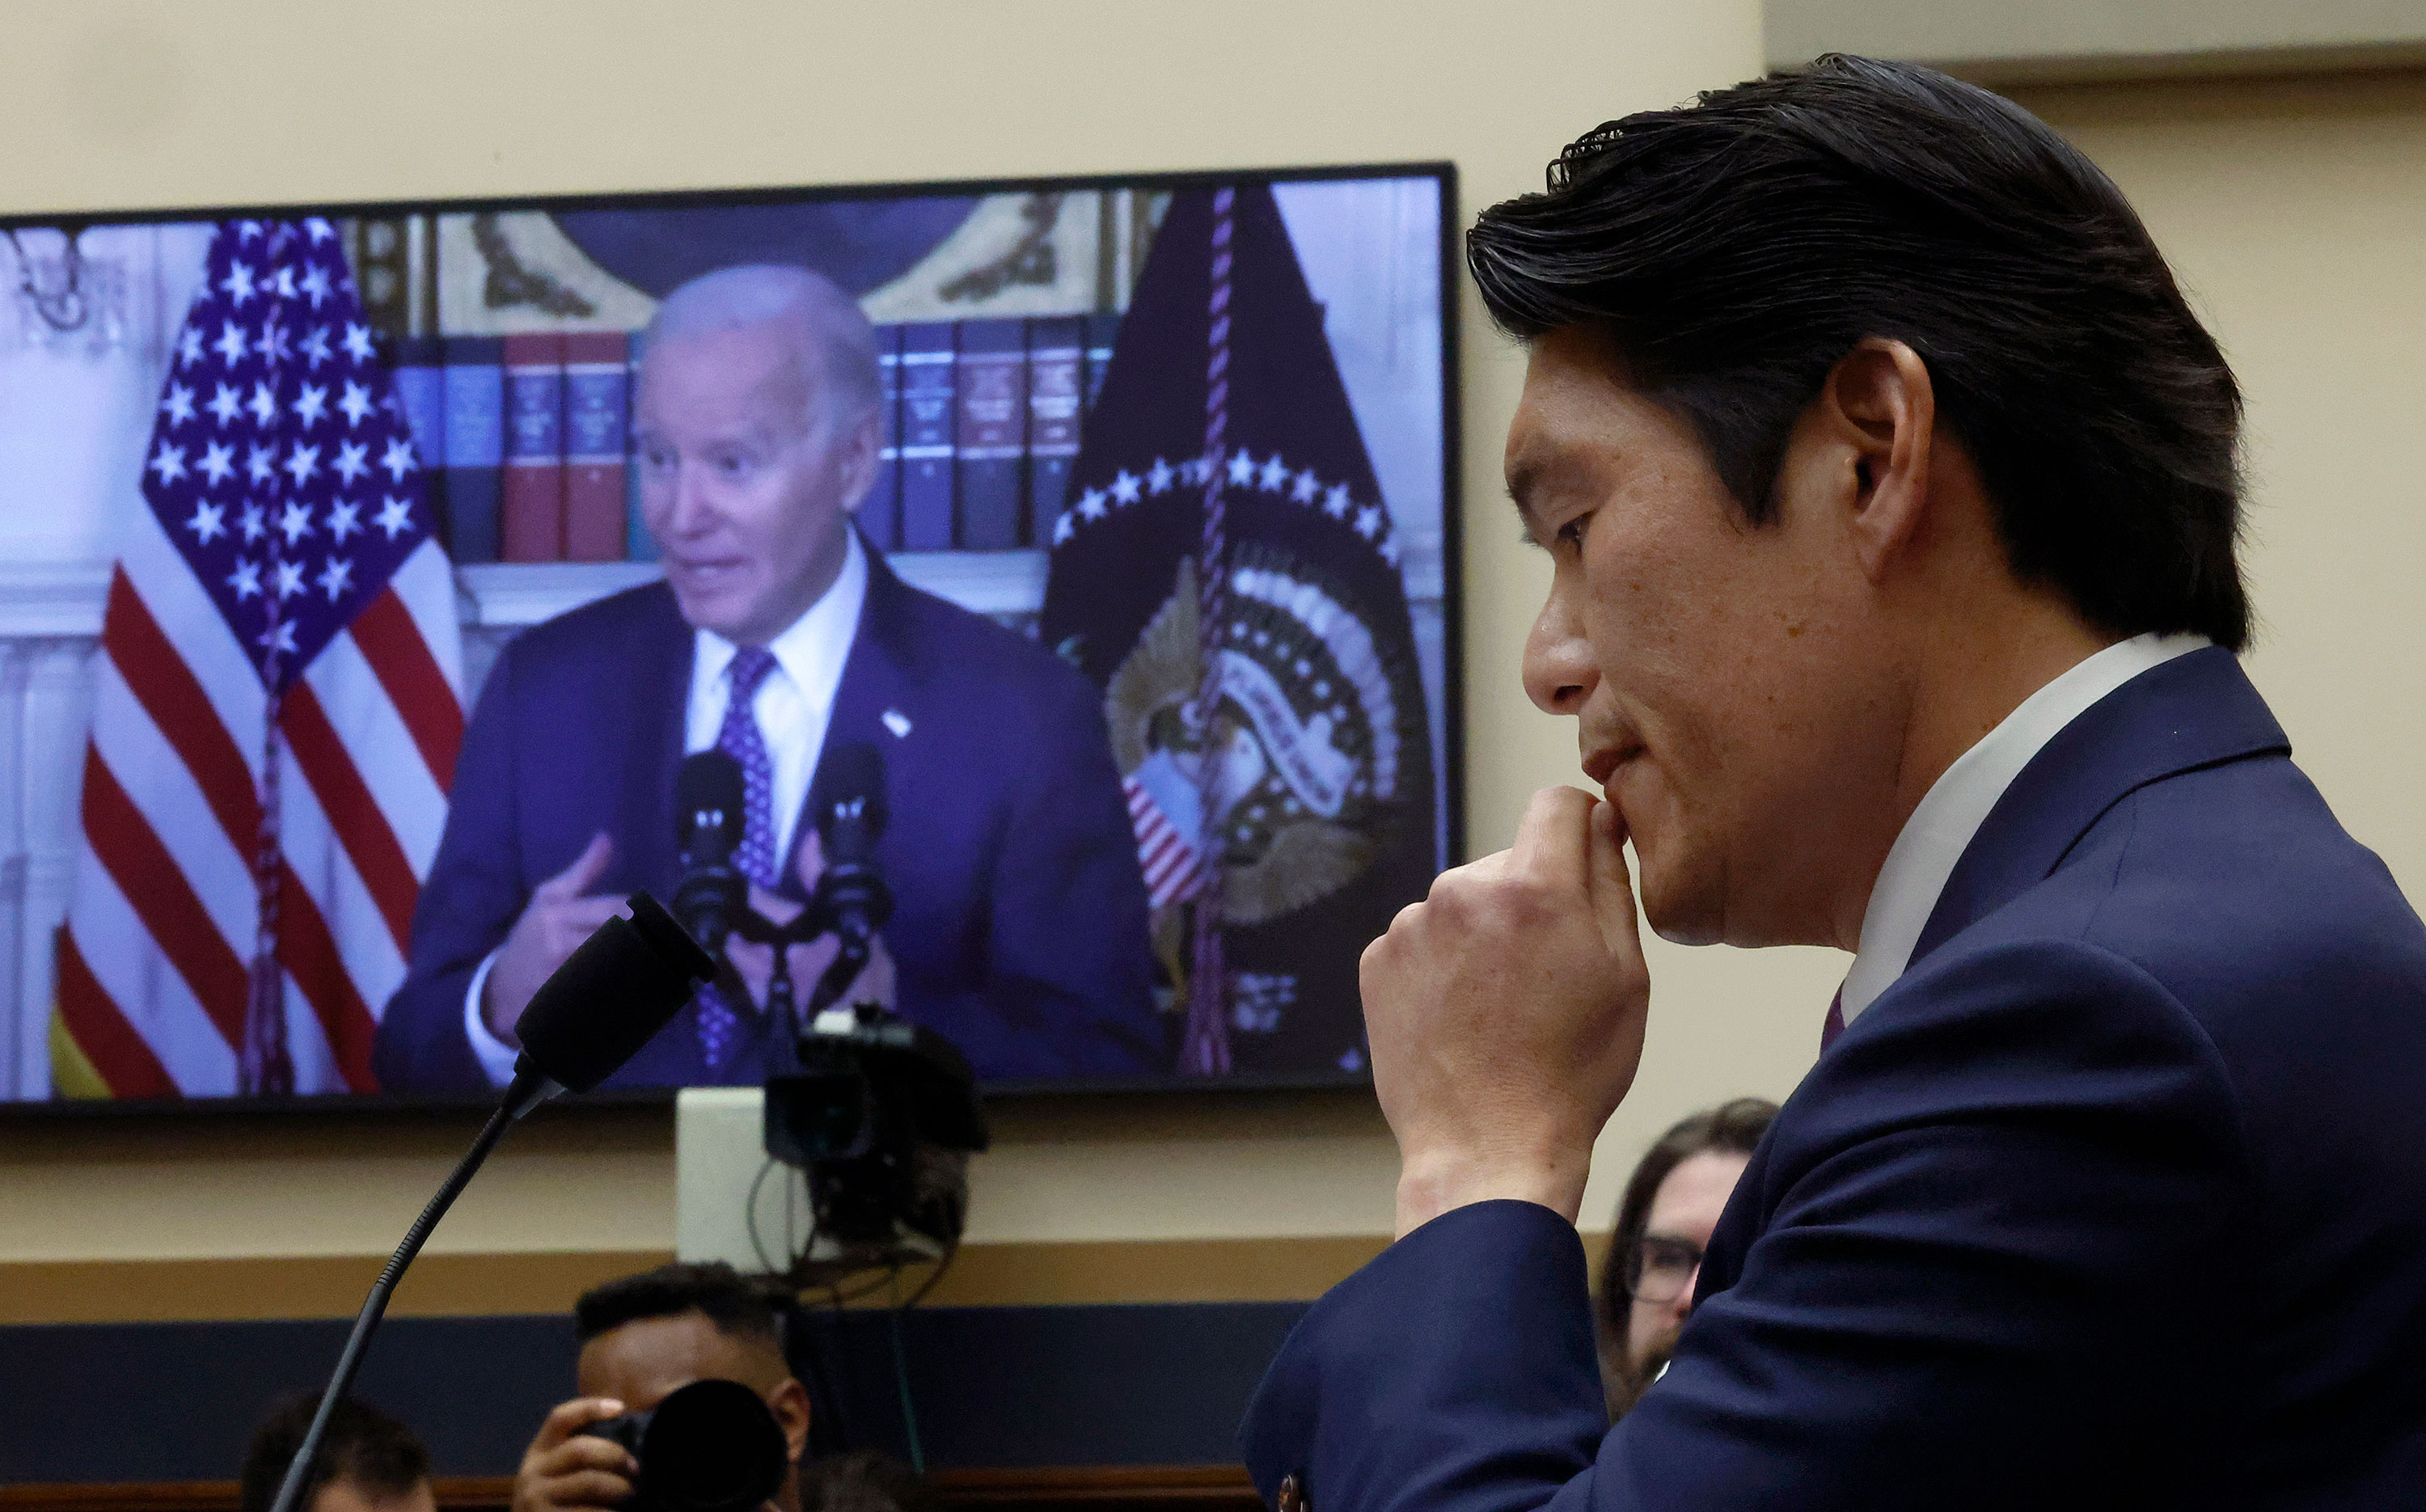 Robert Hur listens as a video of President Joe Biden plays during a hearing on Capitol Hill on Tuesday.